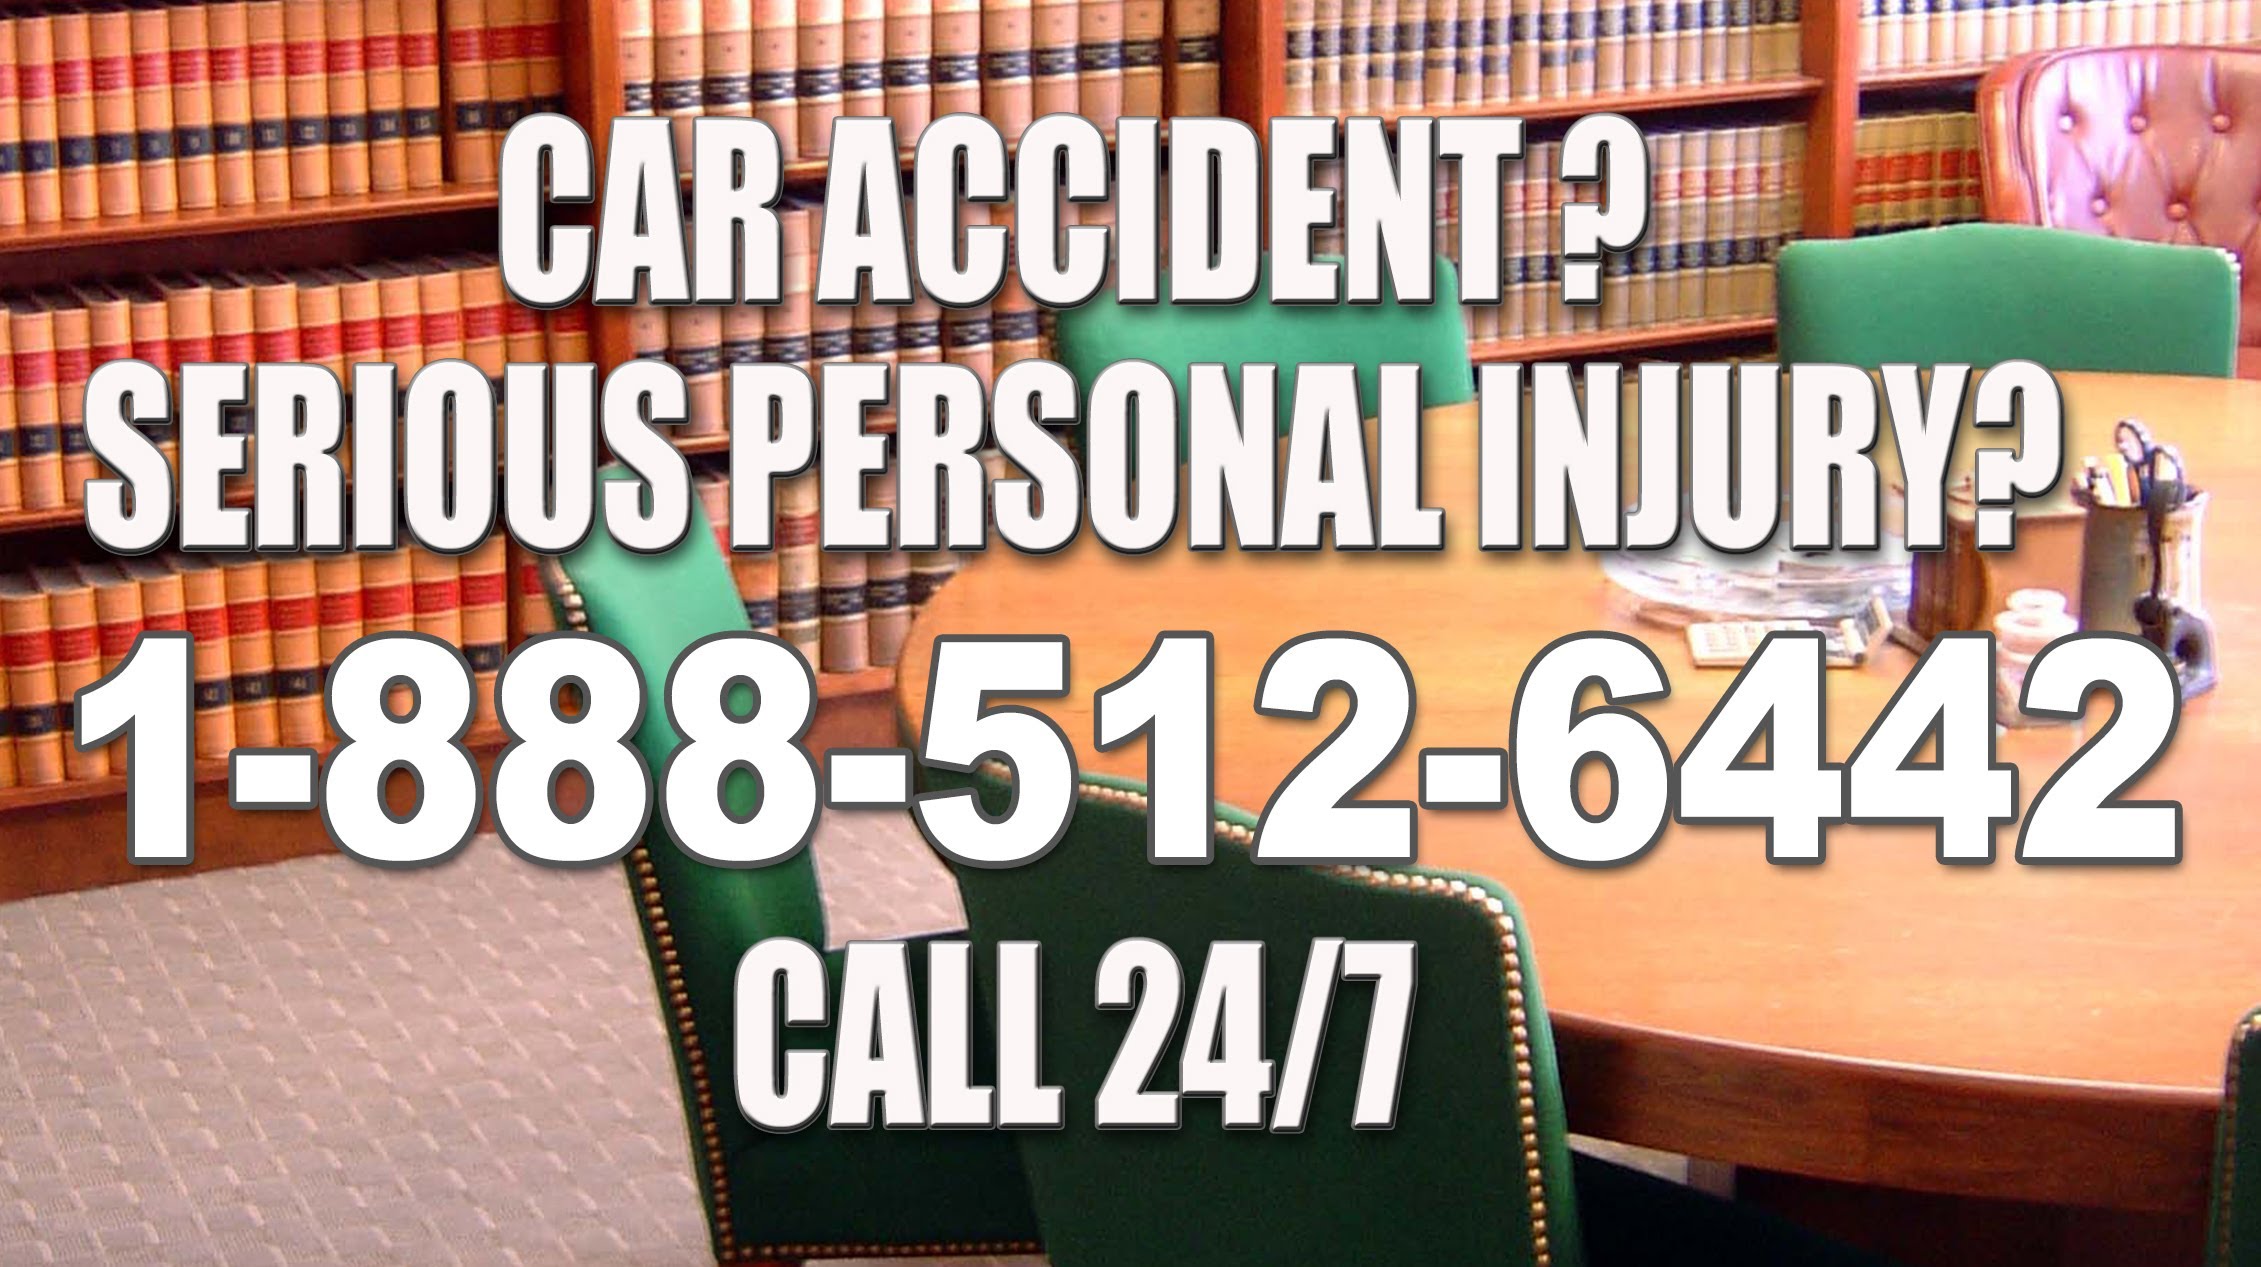 Get Car Accident Lawyer Advice for Personal Injury